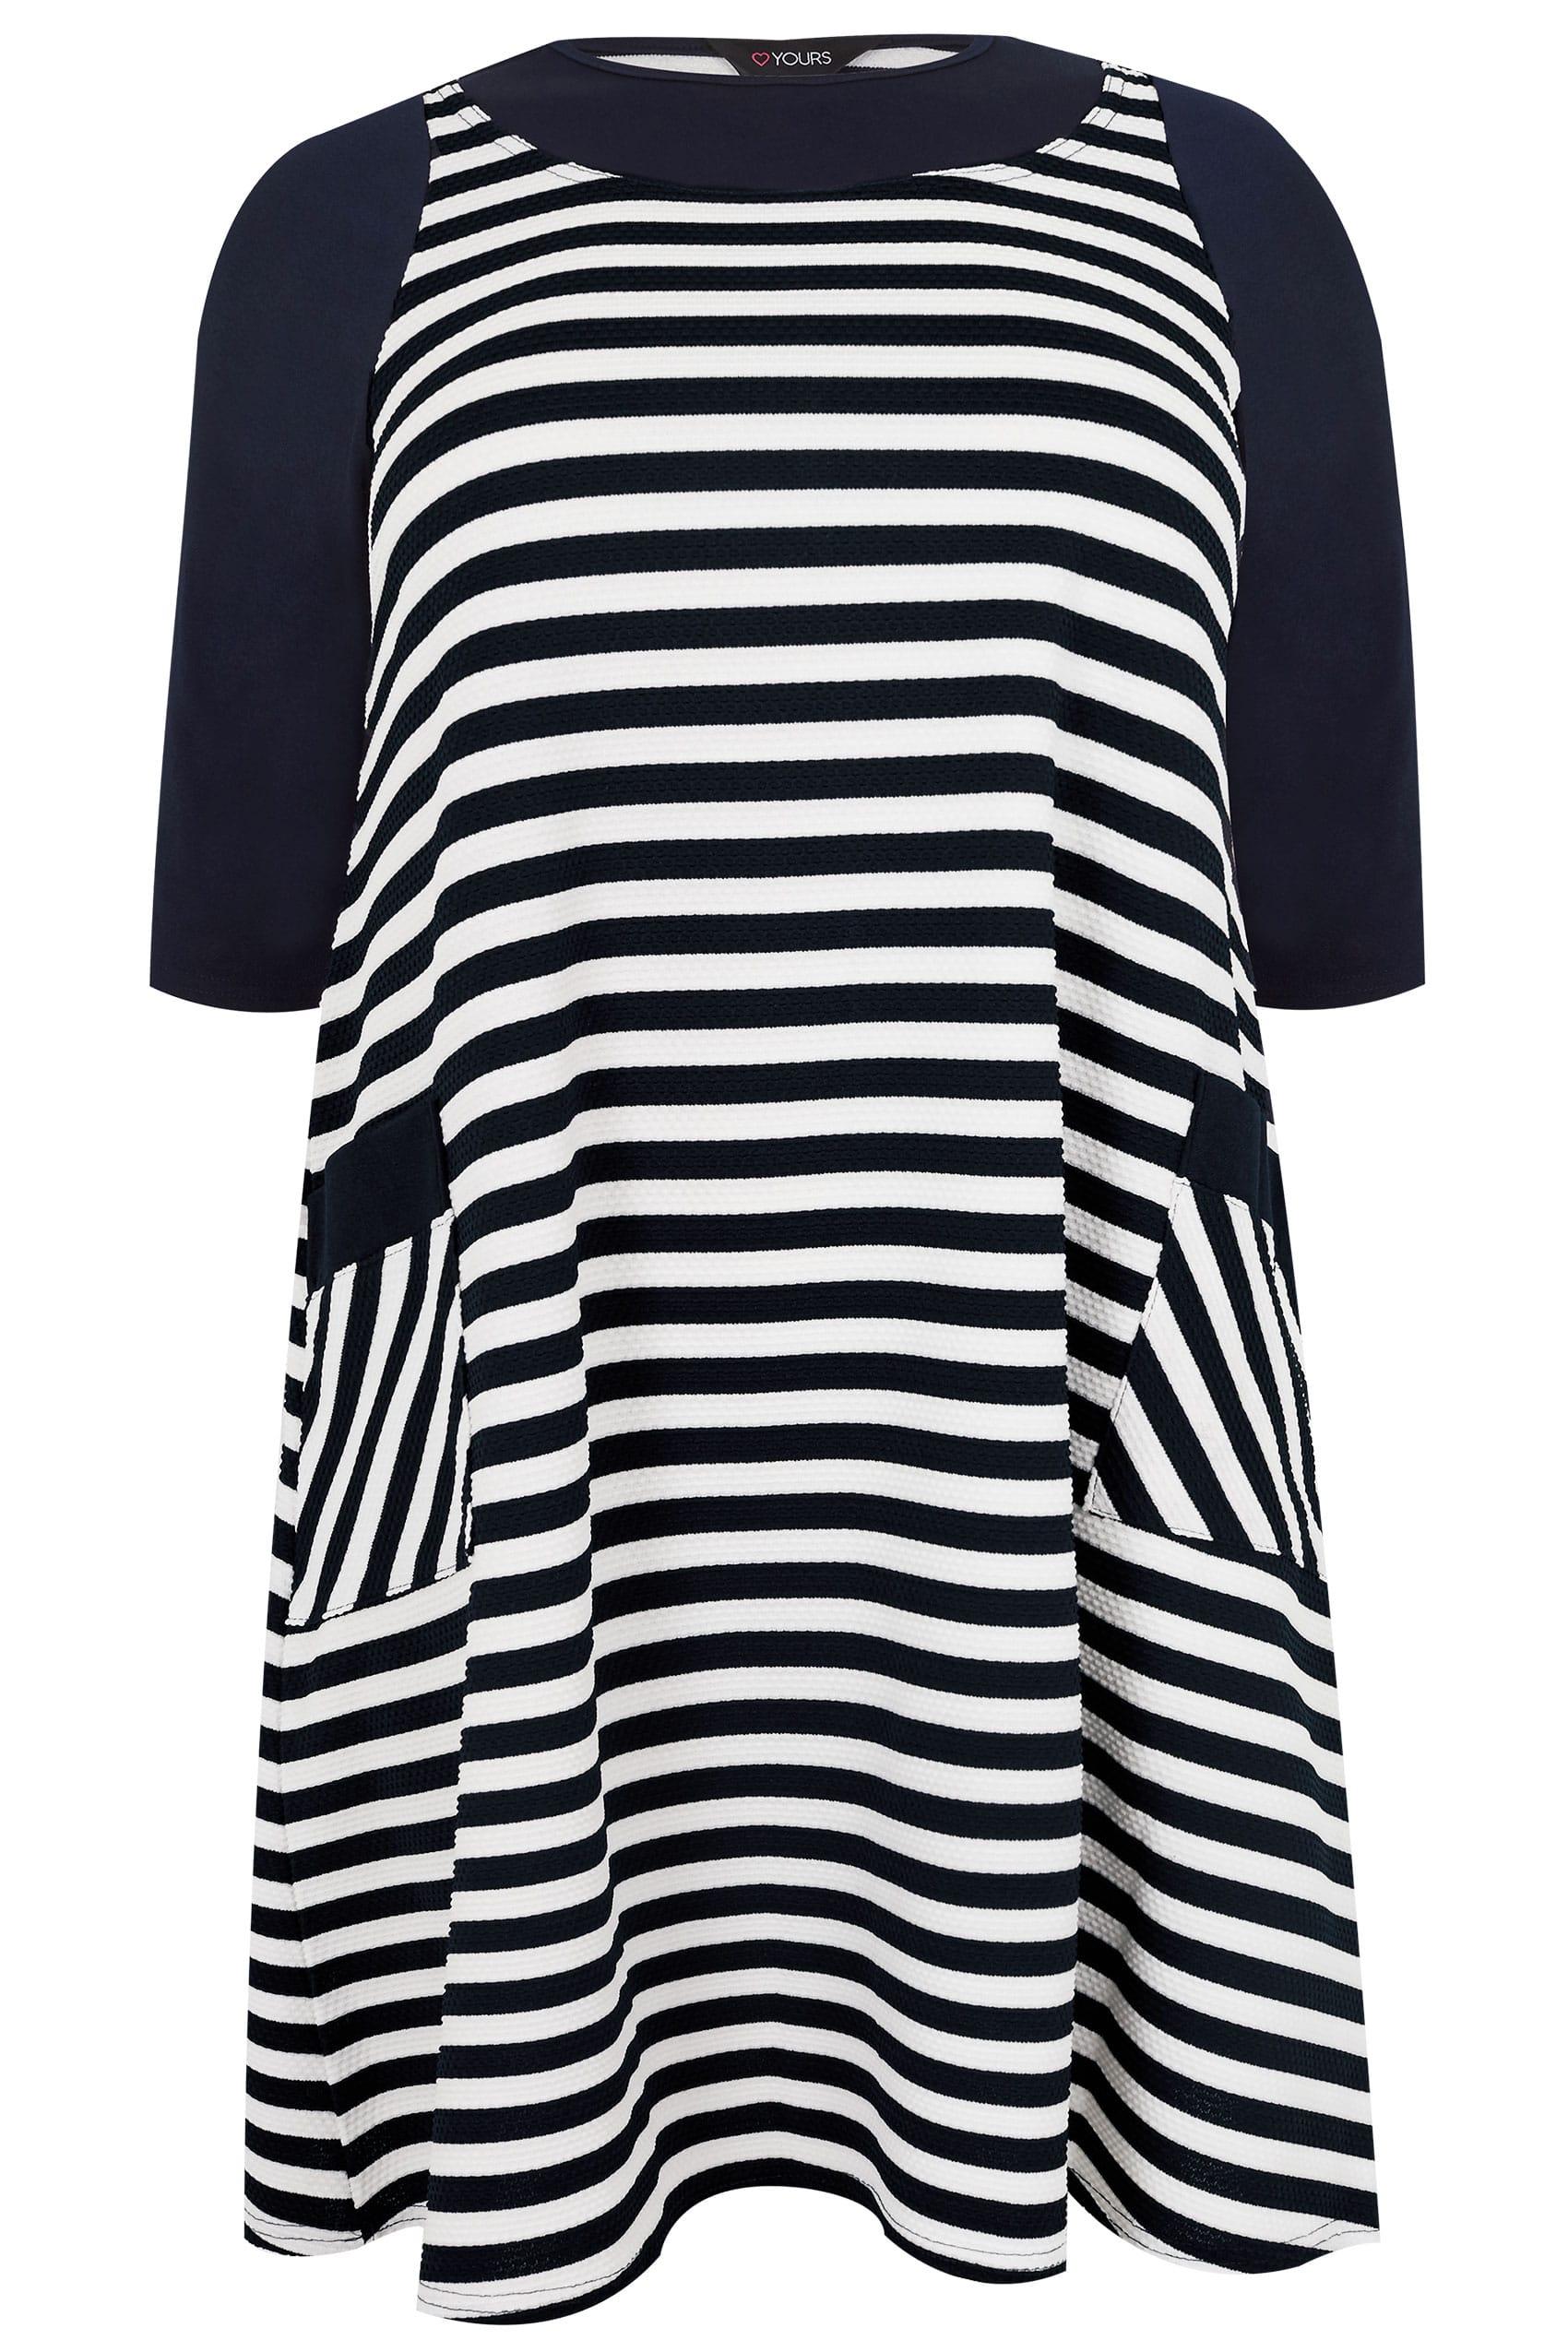 Navy & White Striped Tunic Dress With Pockets, plus size 16 to 32